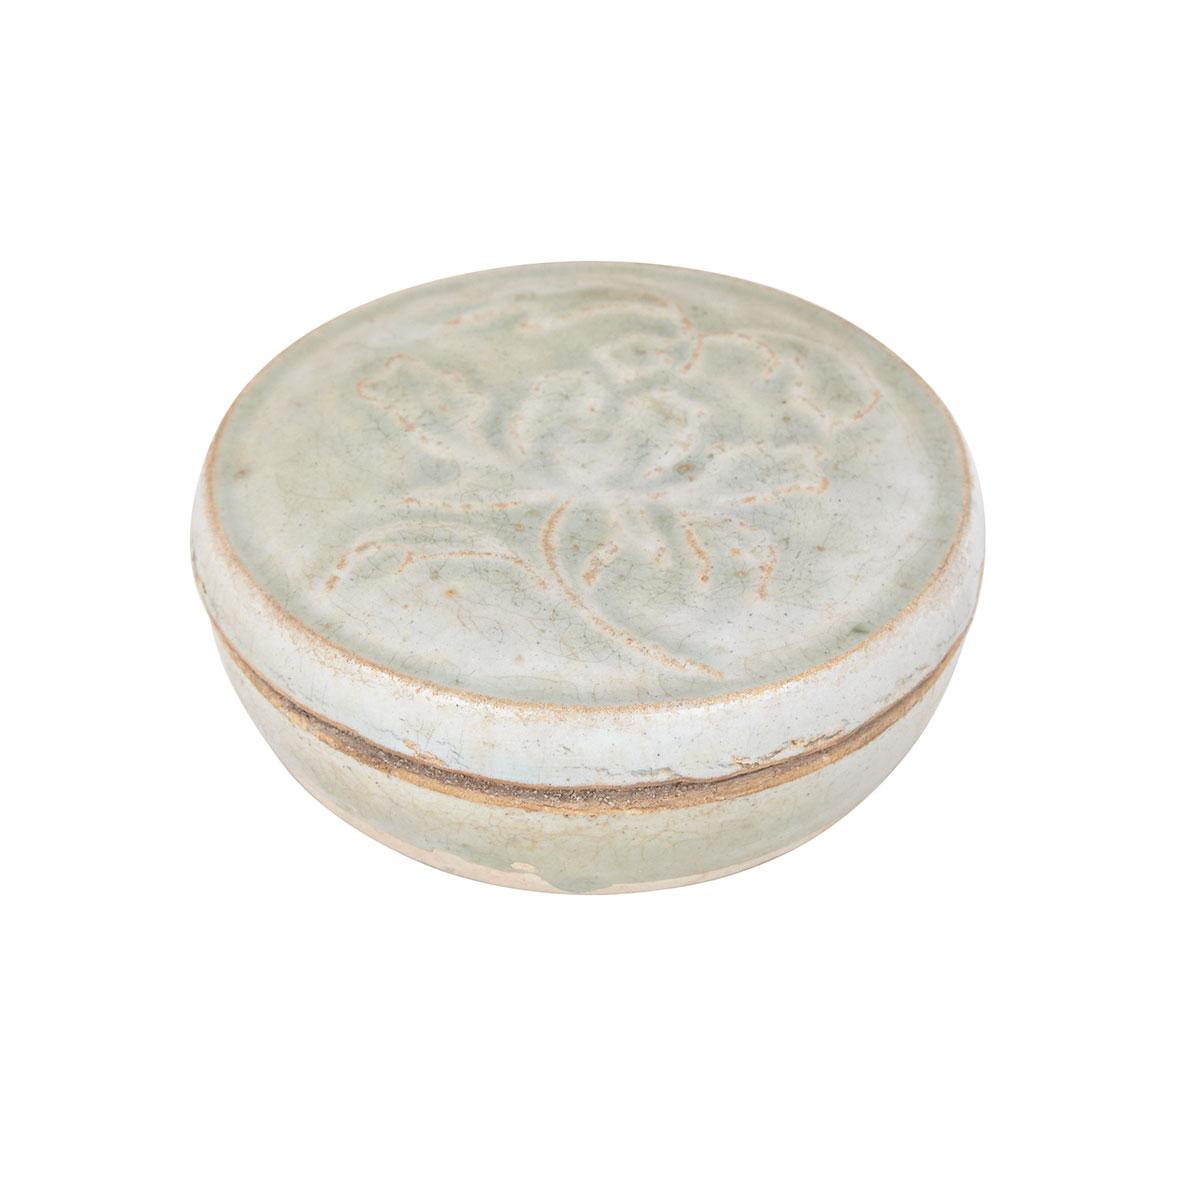 Yinging Glazed Cosmetic Box and Cover, Yuan to Ming Dynasty